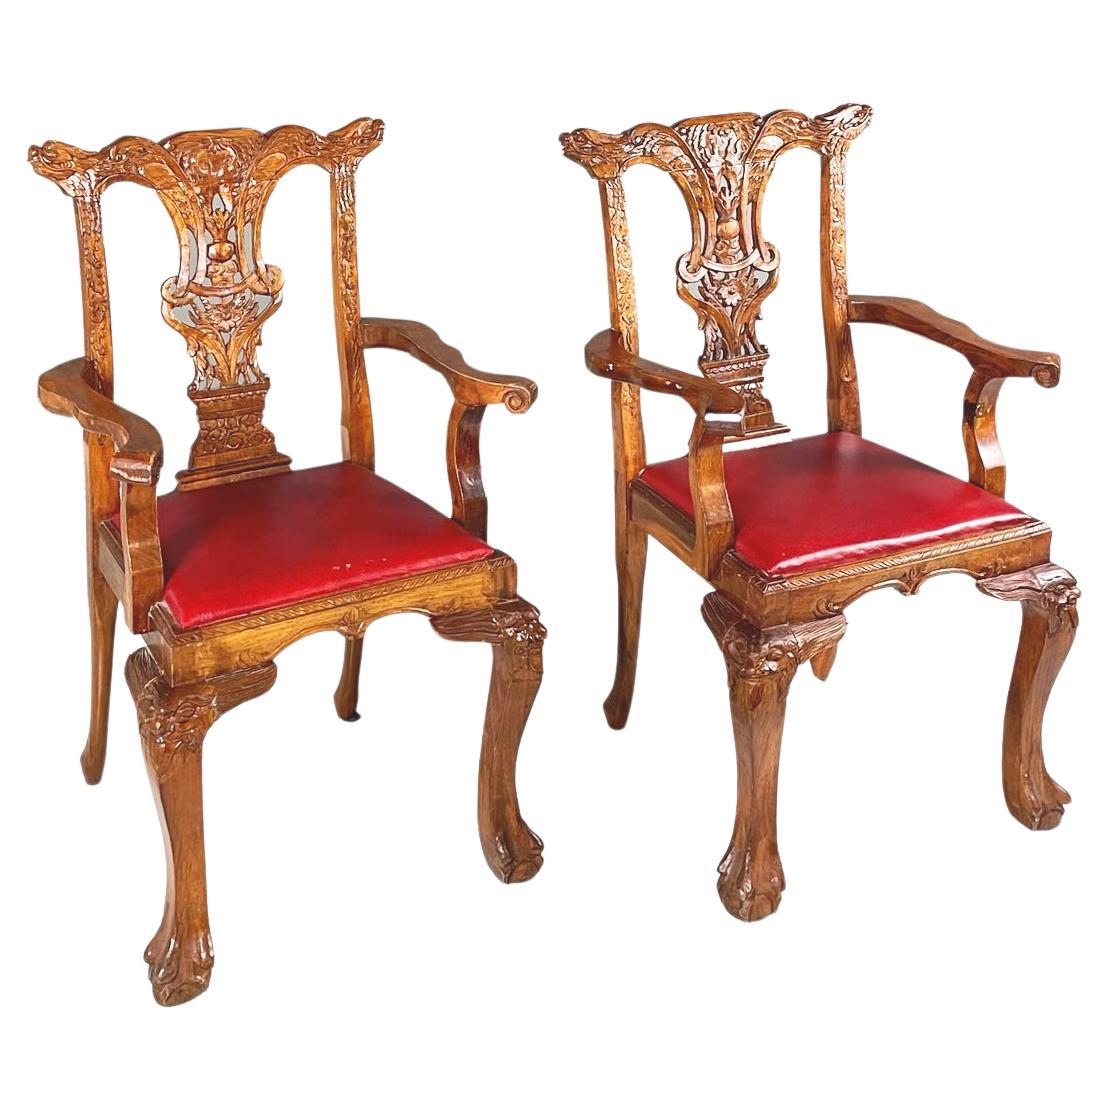 Chippendale Style Wooden Chairs with Red Leather, Early 1900s For Sale